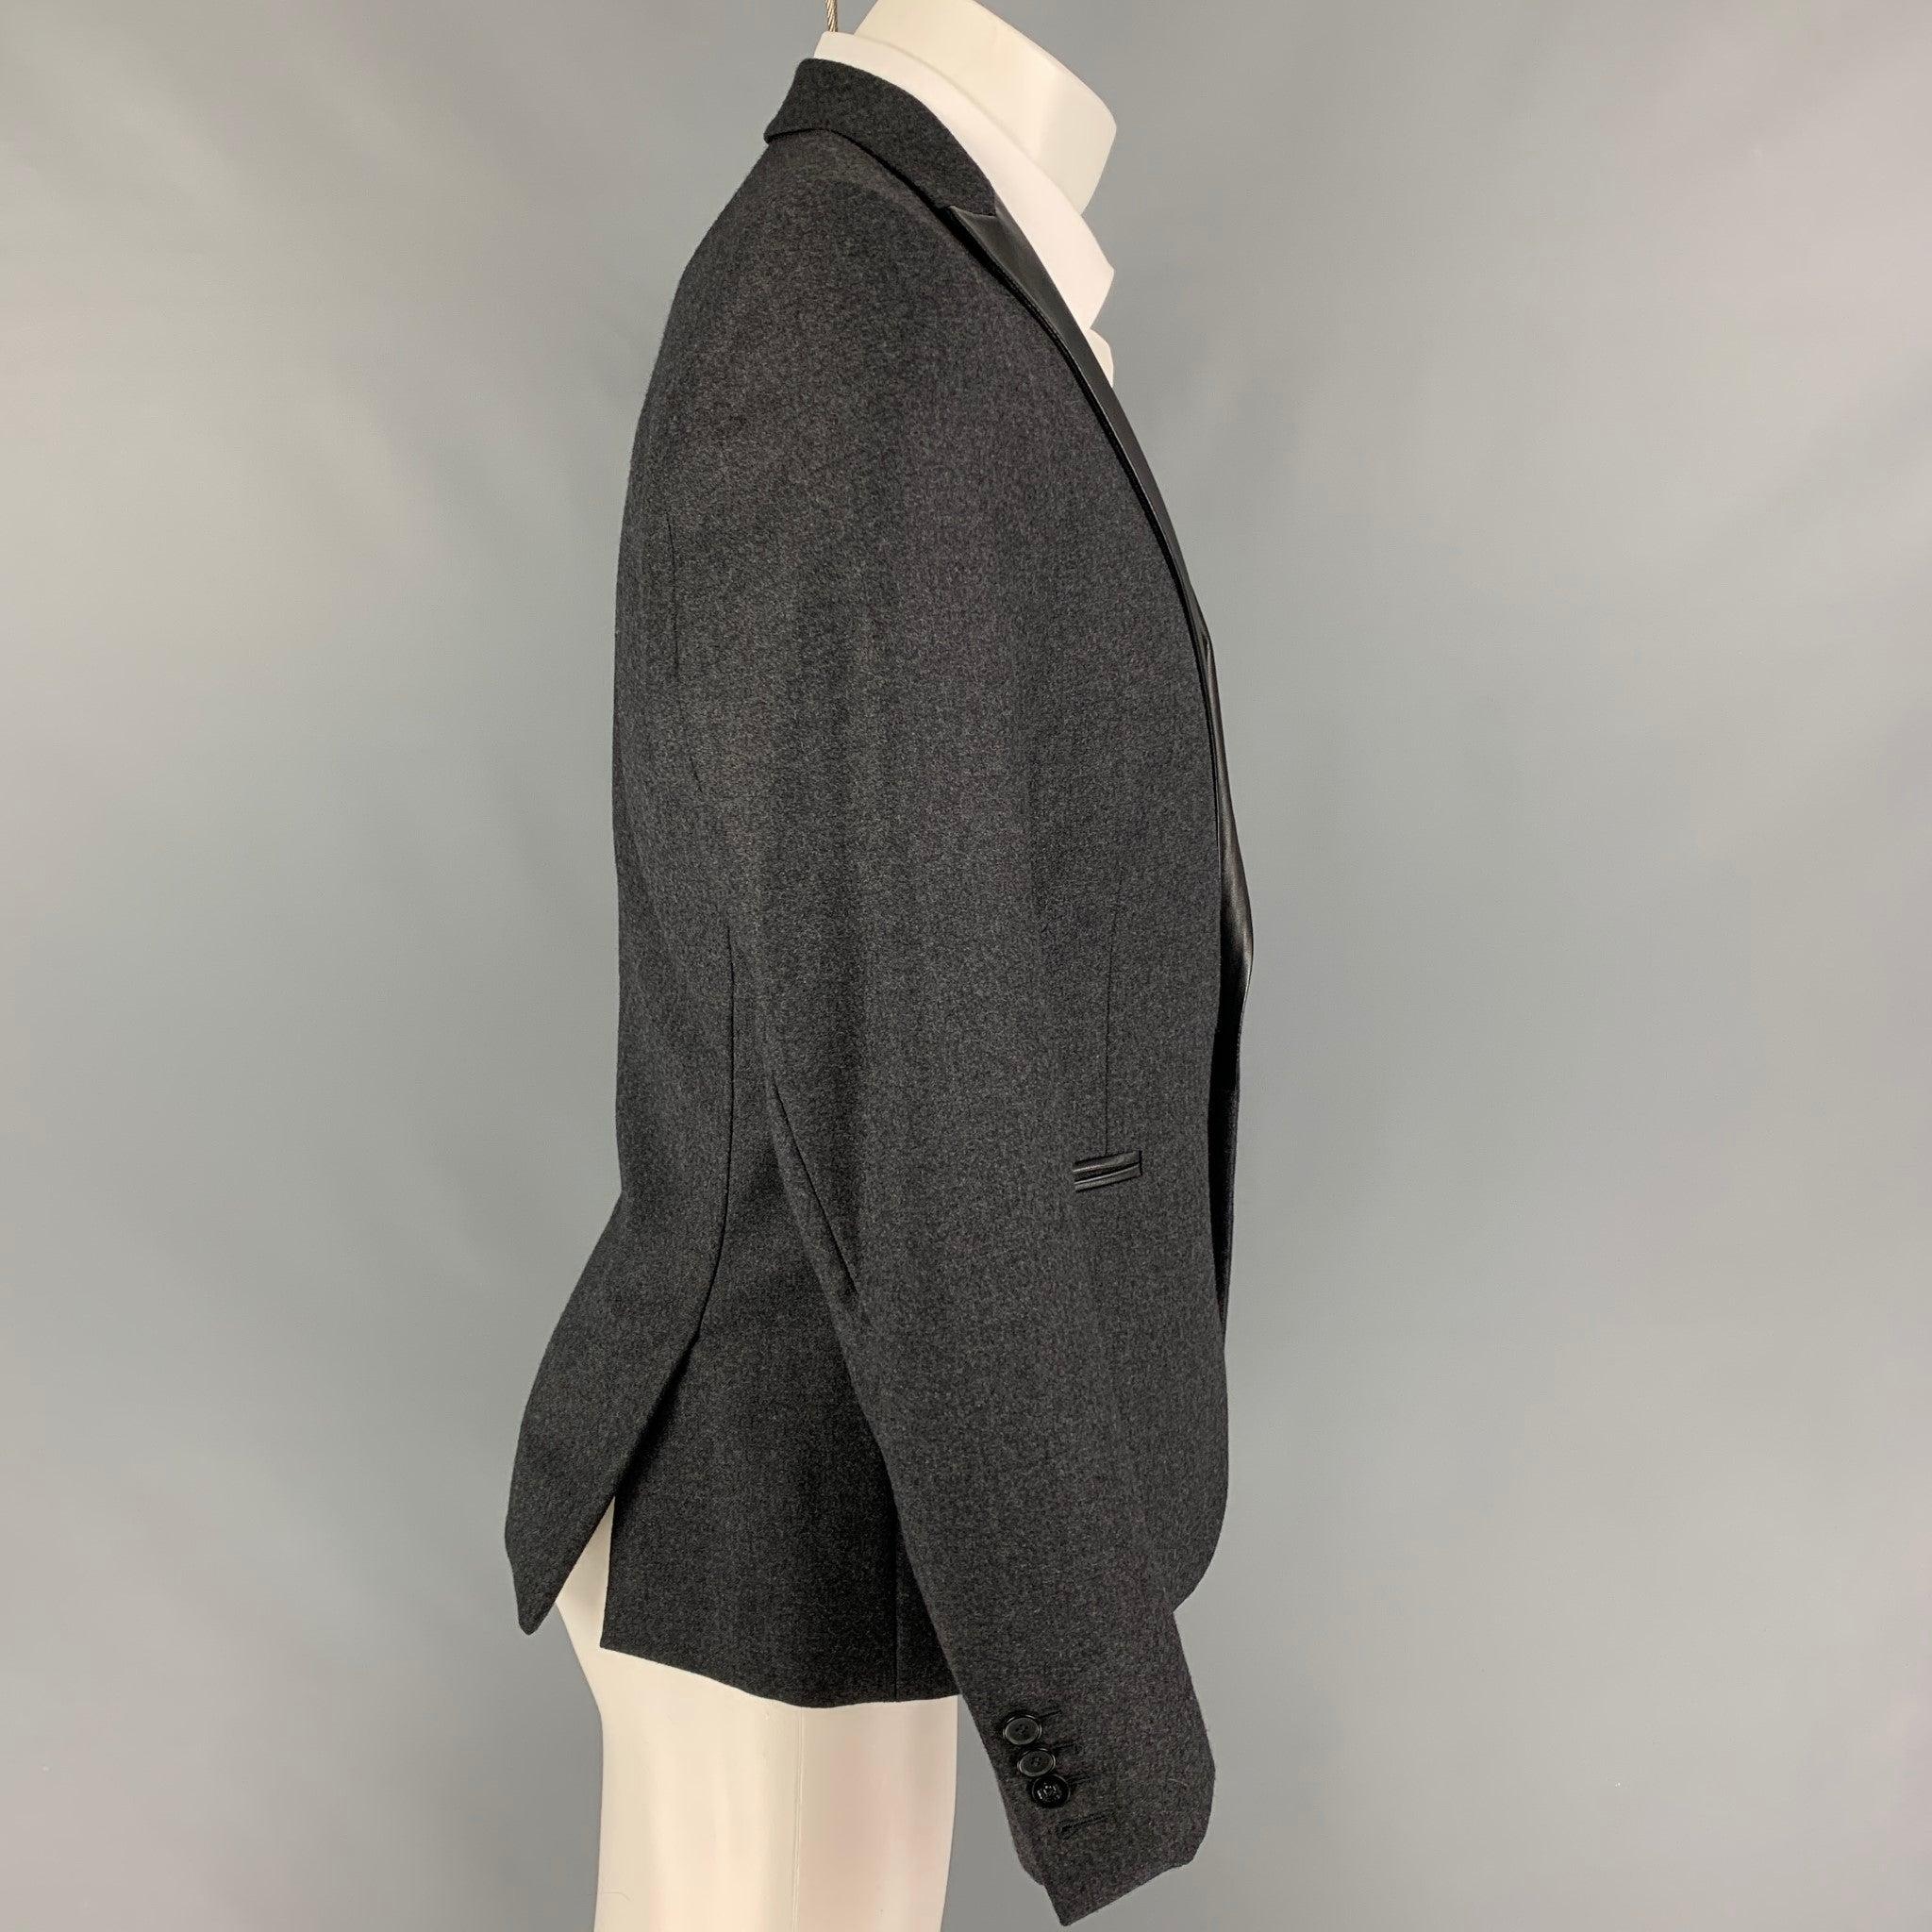 THE KOOPLES sport coat comes in a charcoal wool with a full liner featuring a leather peak lapel, slit pockets, double back vent, and a single button closure.
Very Good
Pre-Owned Condition. 

Marked:   48 

Measurements: 
 
Shoulder: 17 inches 